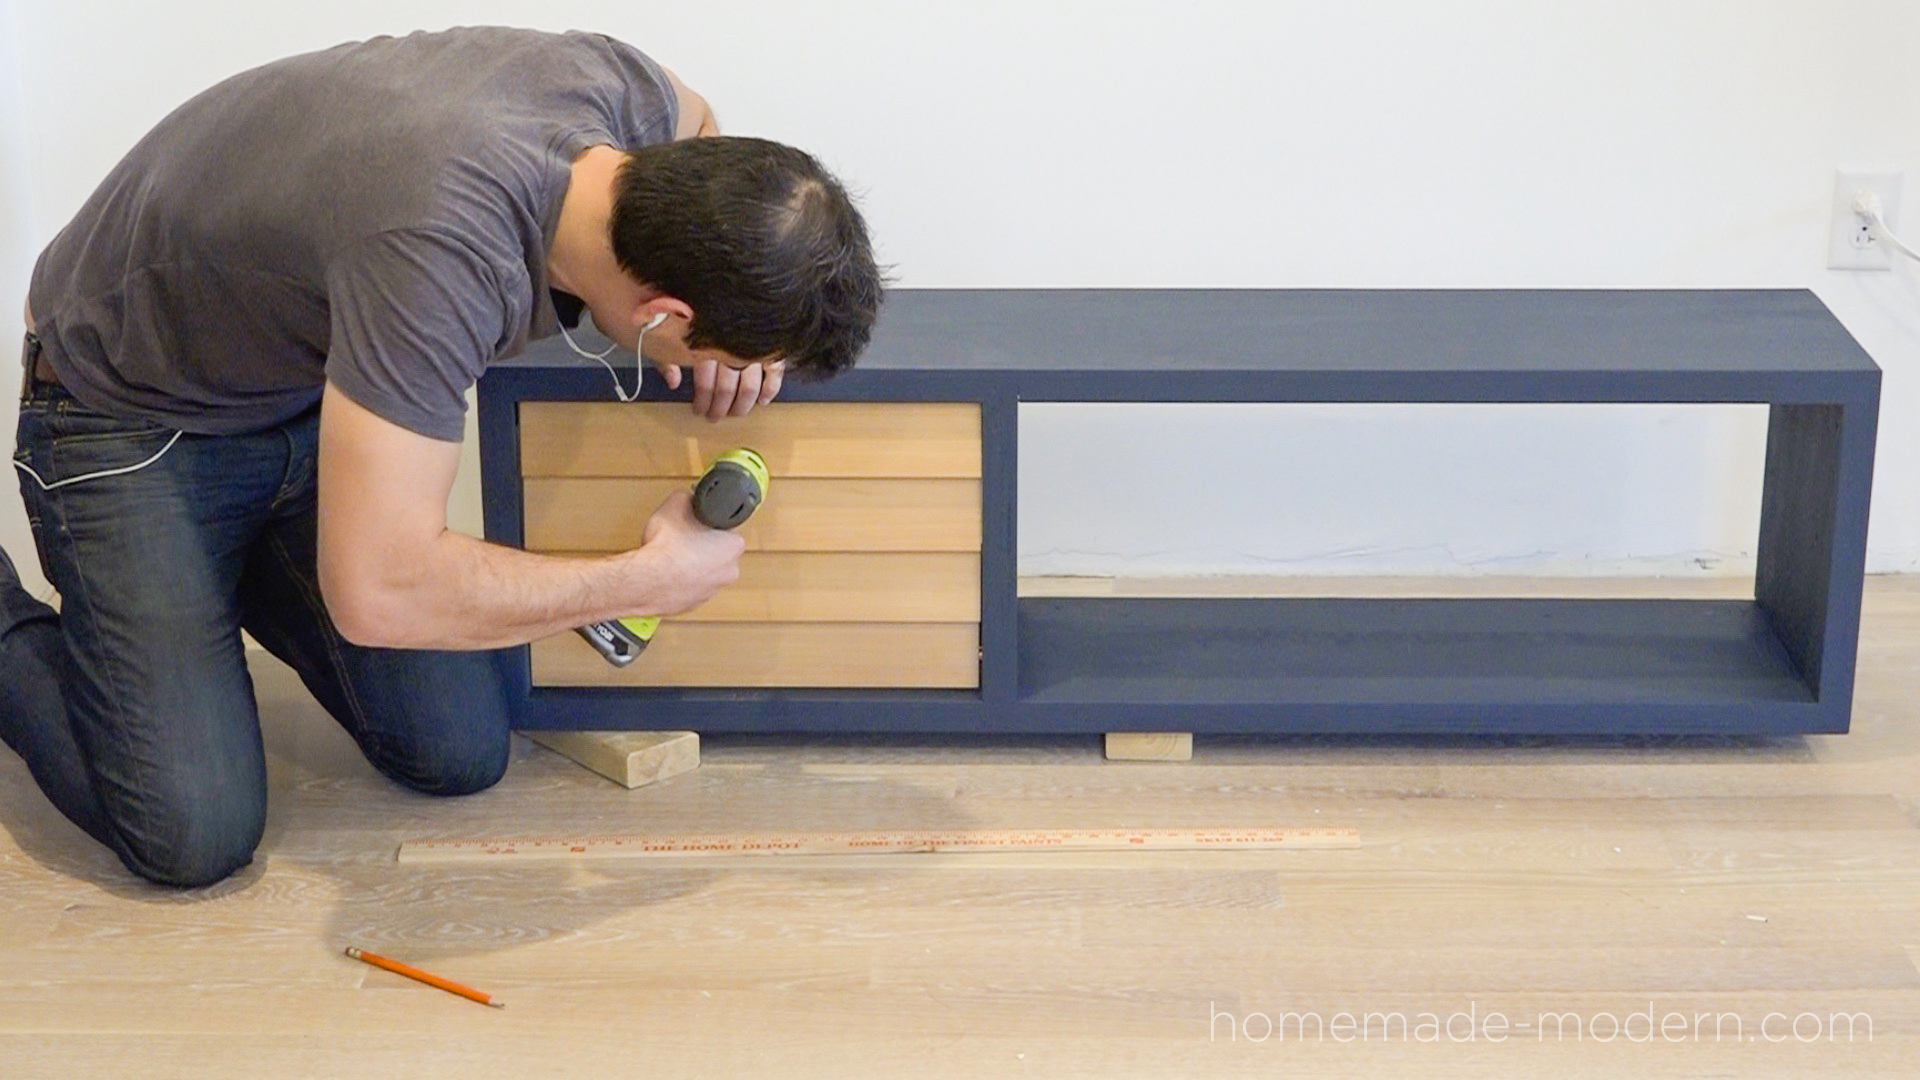 This DIY mid-century model media console is made from materials available at Home Depot for less than $100.  Full instructions can be found at HomeMade-modern.com.